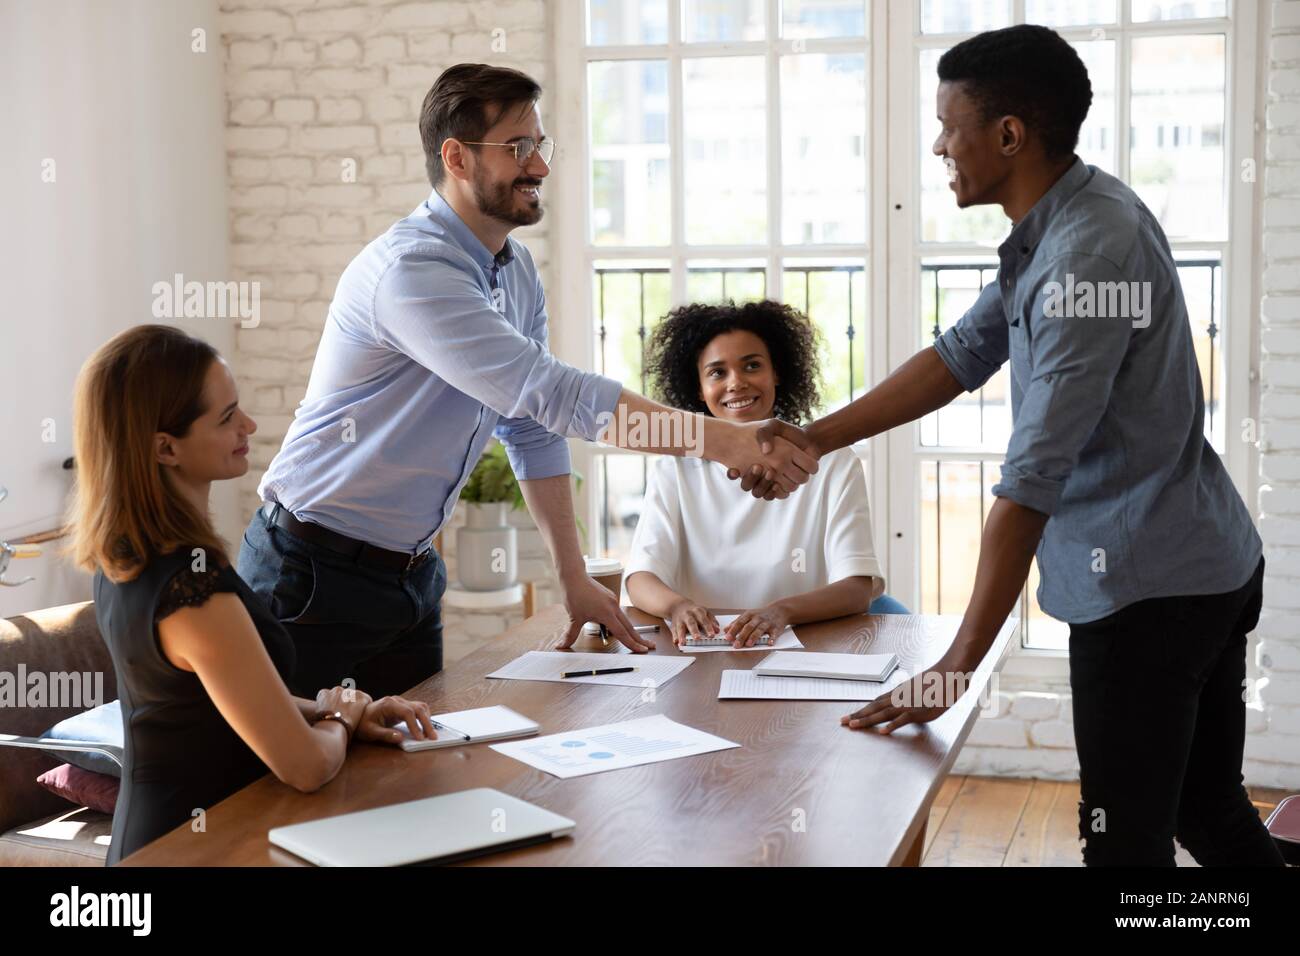 Happy diverse business partners shaking hands, making agreement Stock Photo